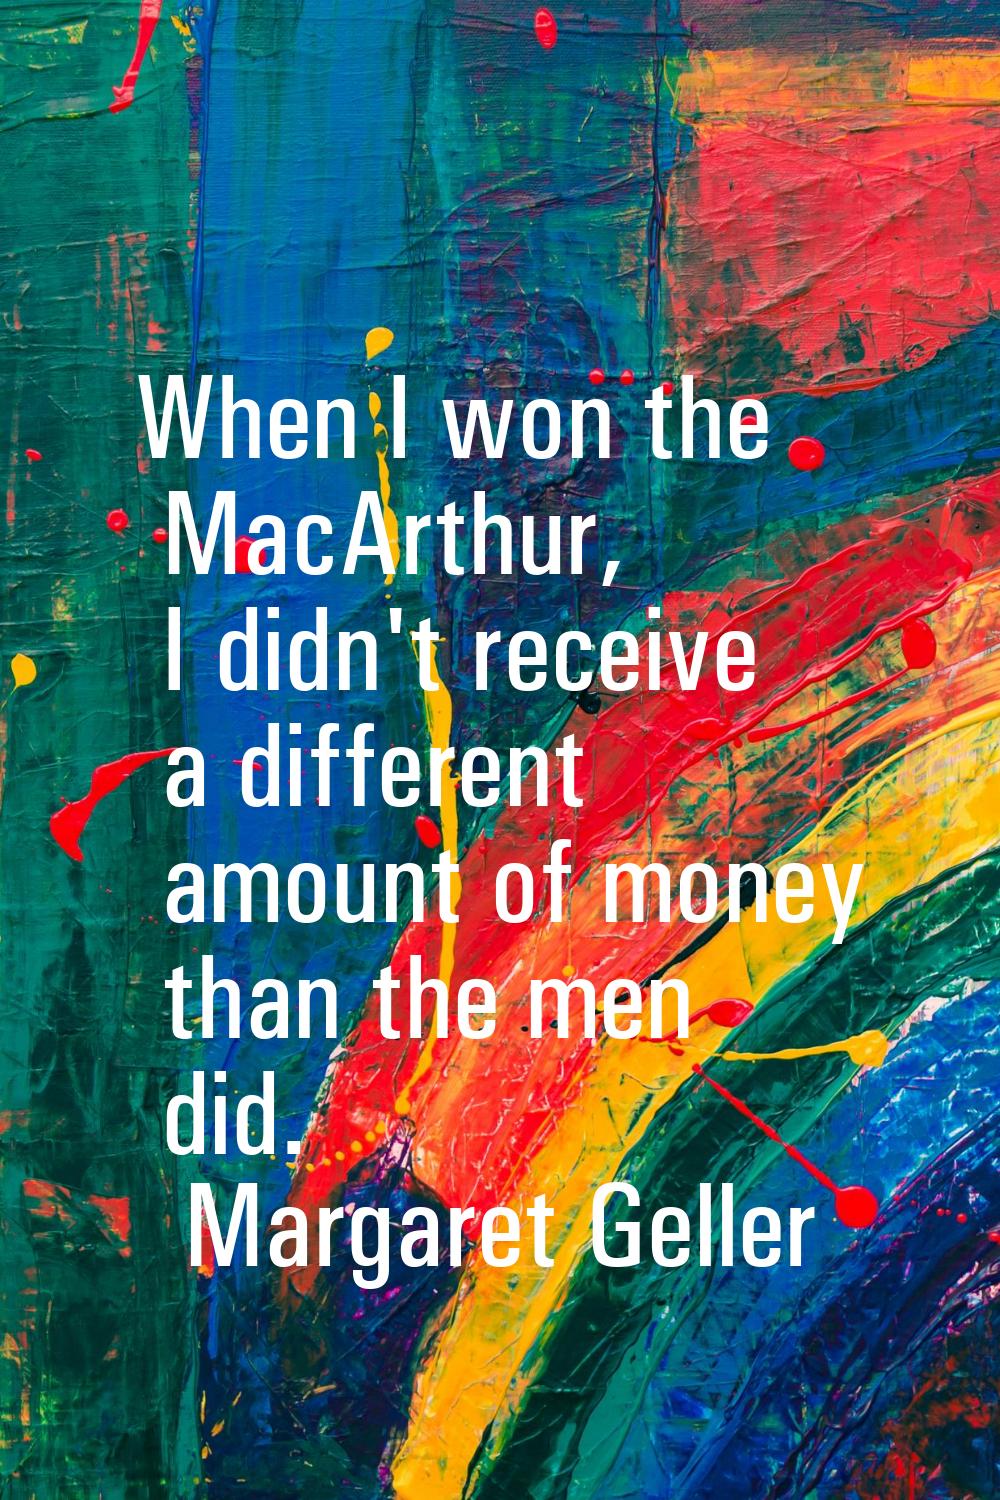 When I won the MacArthur, I didn't receive a different amount of money than the men did.